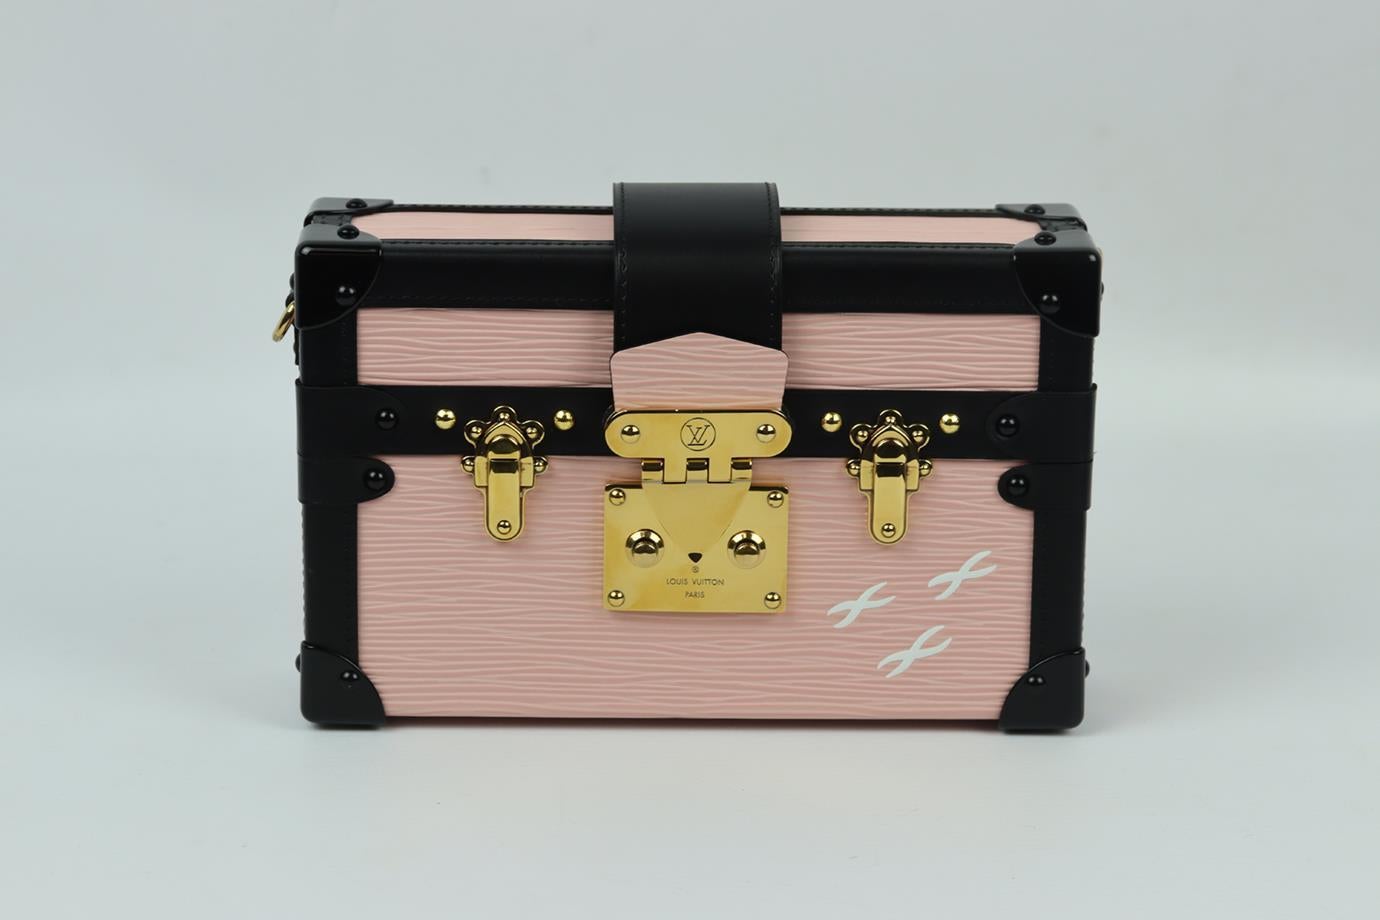 Louis Vuitton Petite Malle small epi leather clutch. Made from pink, white and black Epi leather with gold-tone hardware, it has a large internal compartment and shoulder strap. Pink, white and black. Push lock fastening at front. Does not come with